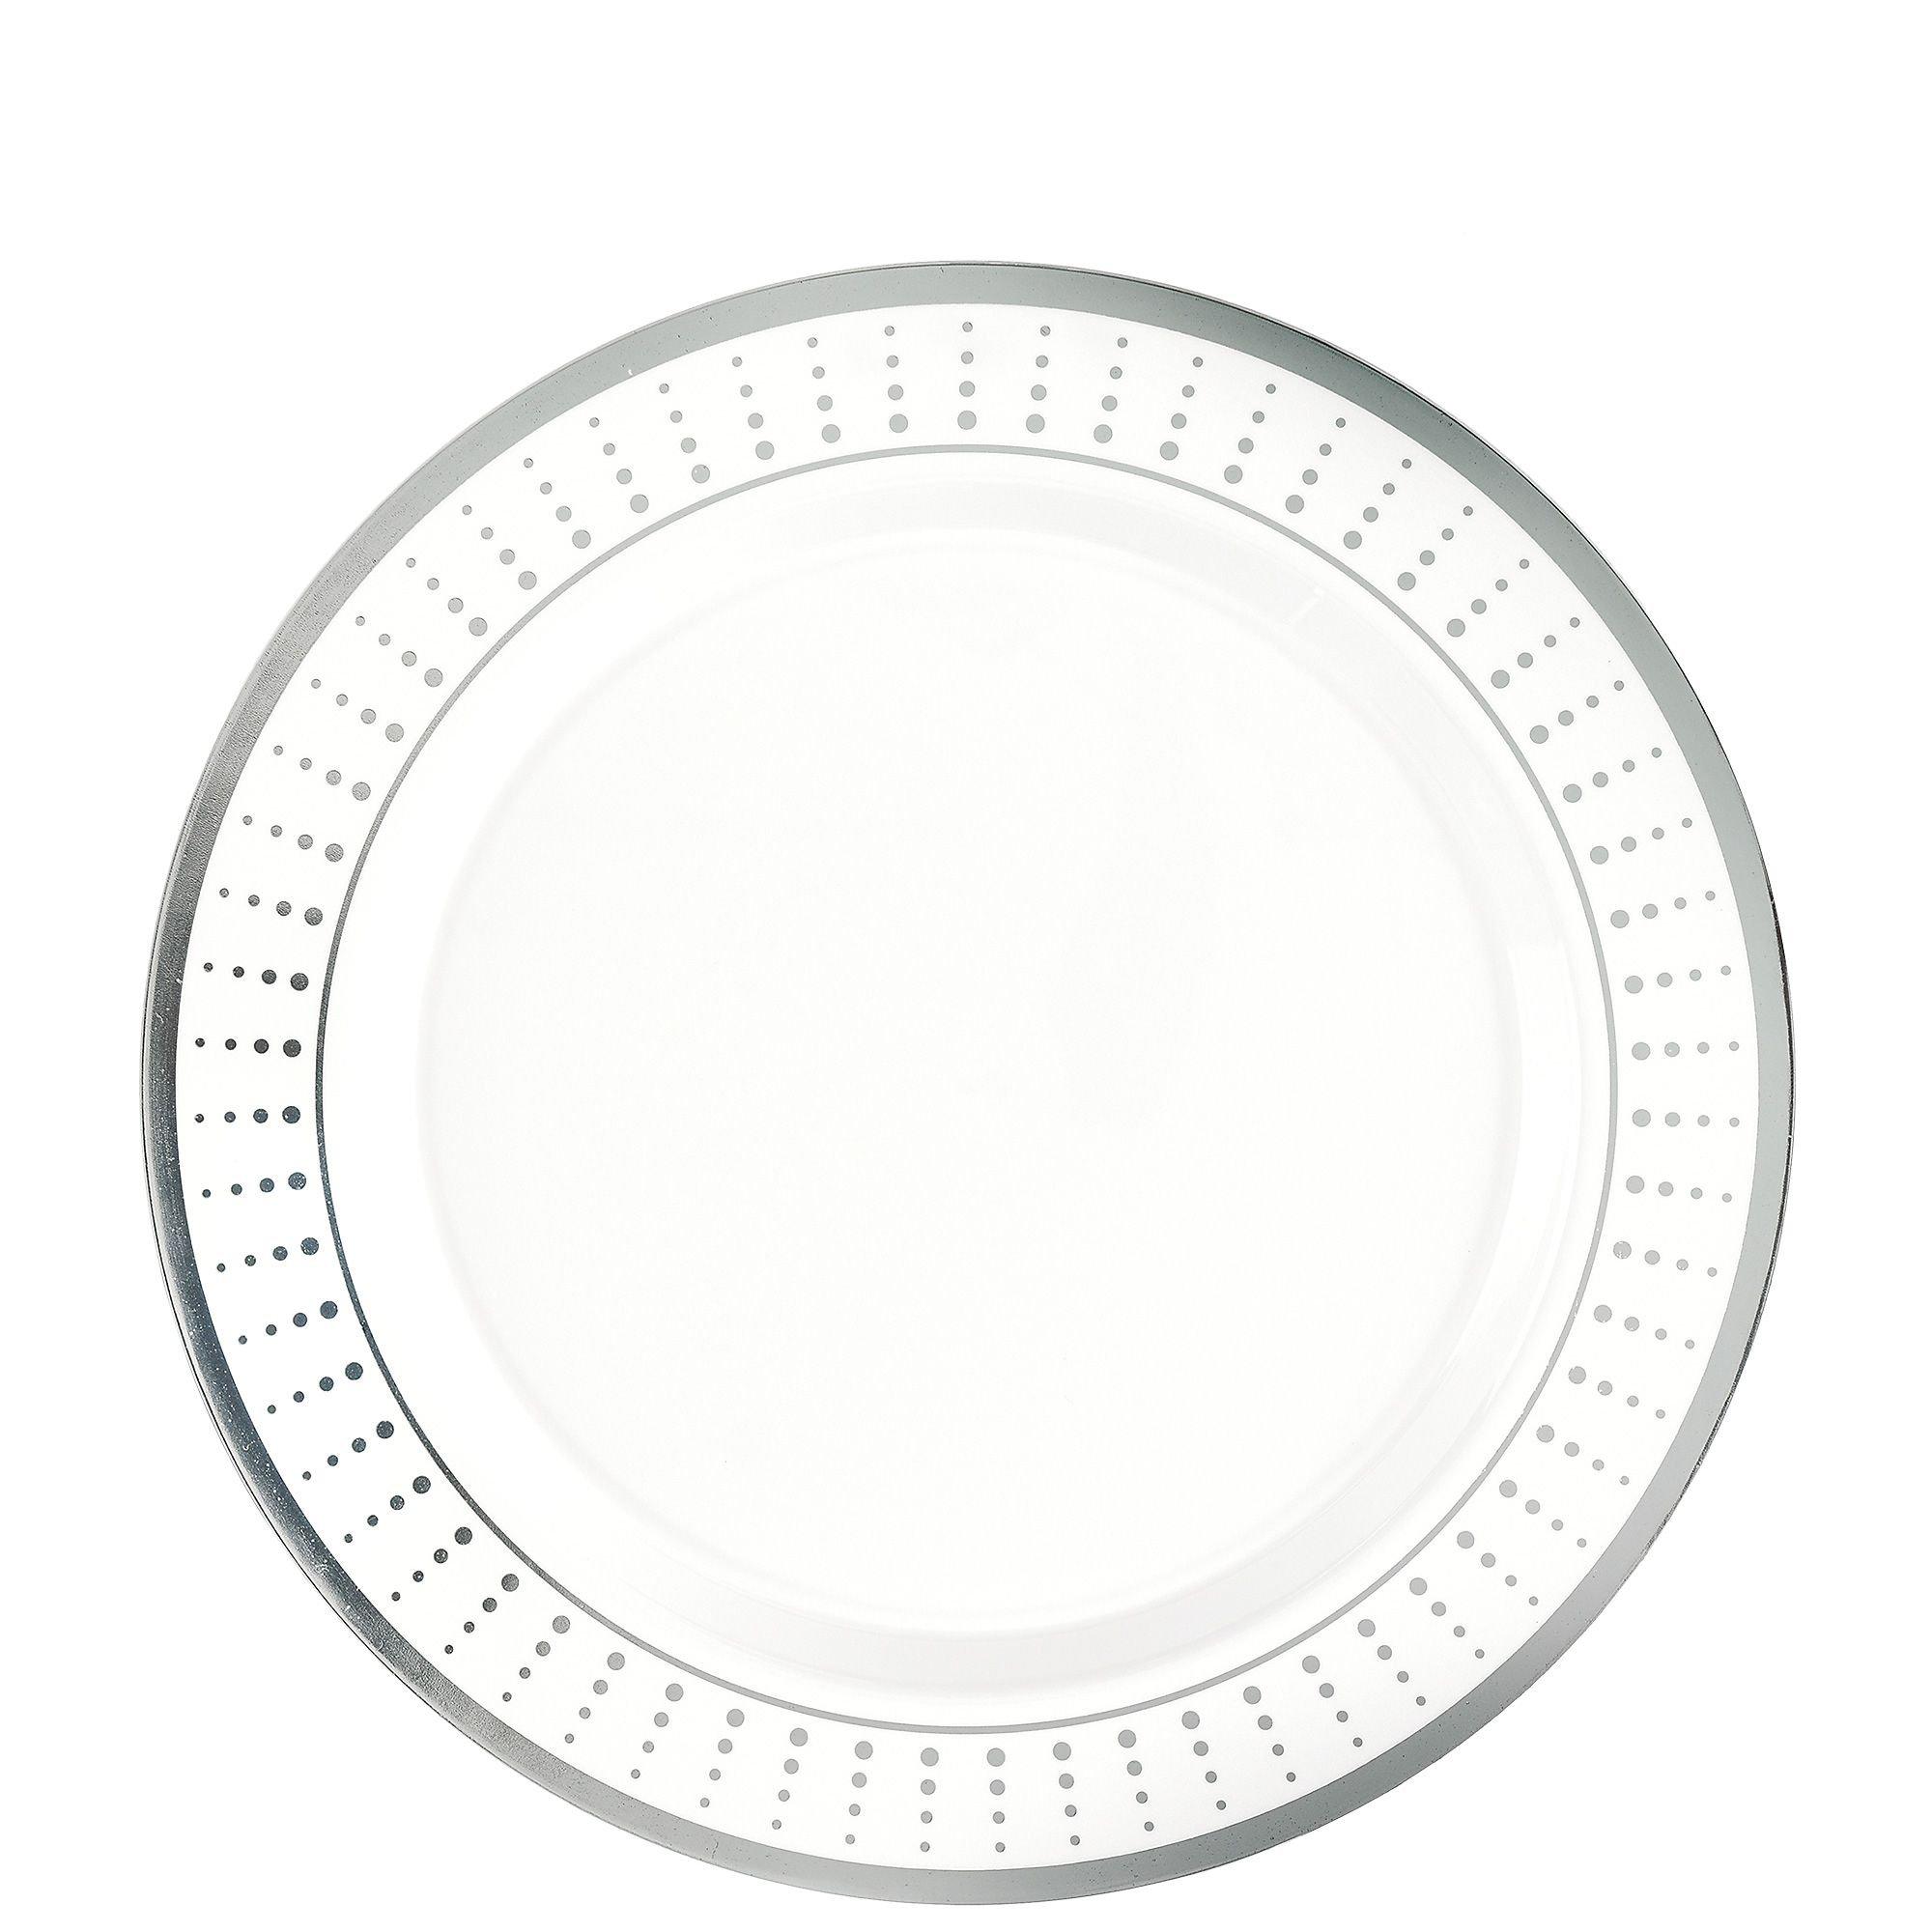 White With Silver Radiating Dot Patterned Rim Premium Plastic Dessert Plates, 7.5in, 20ct